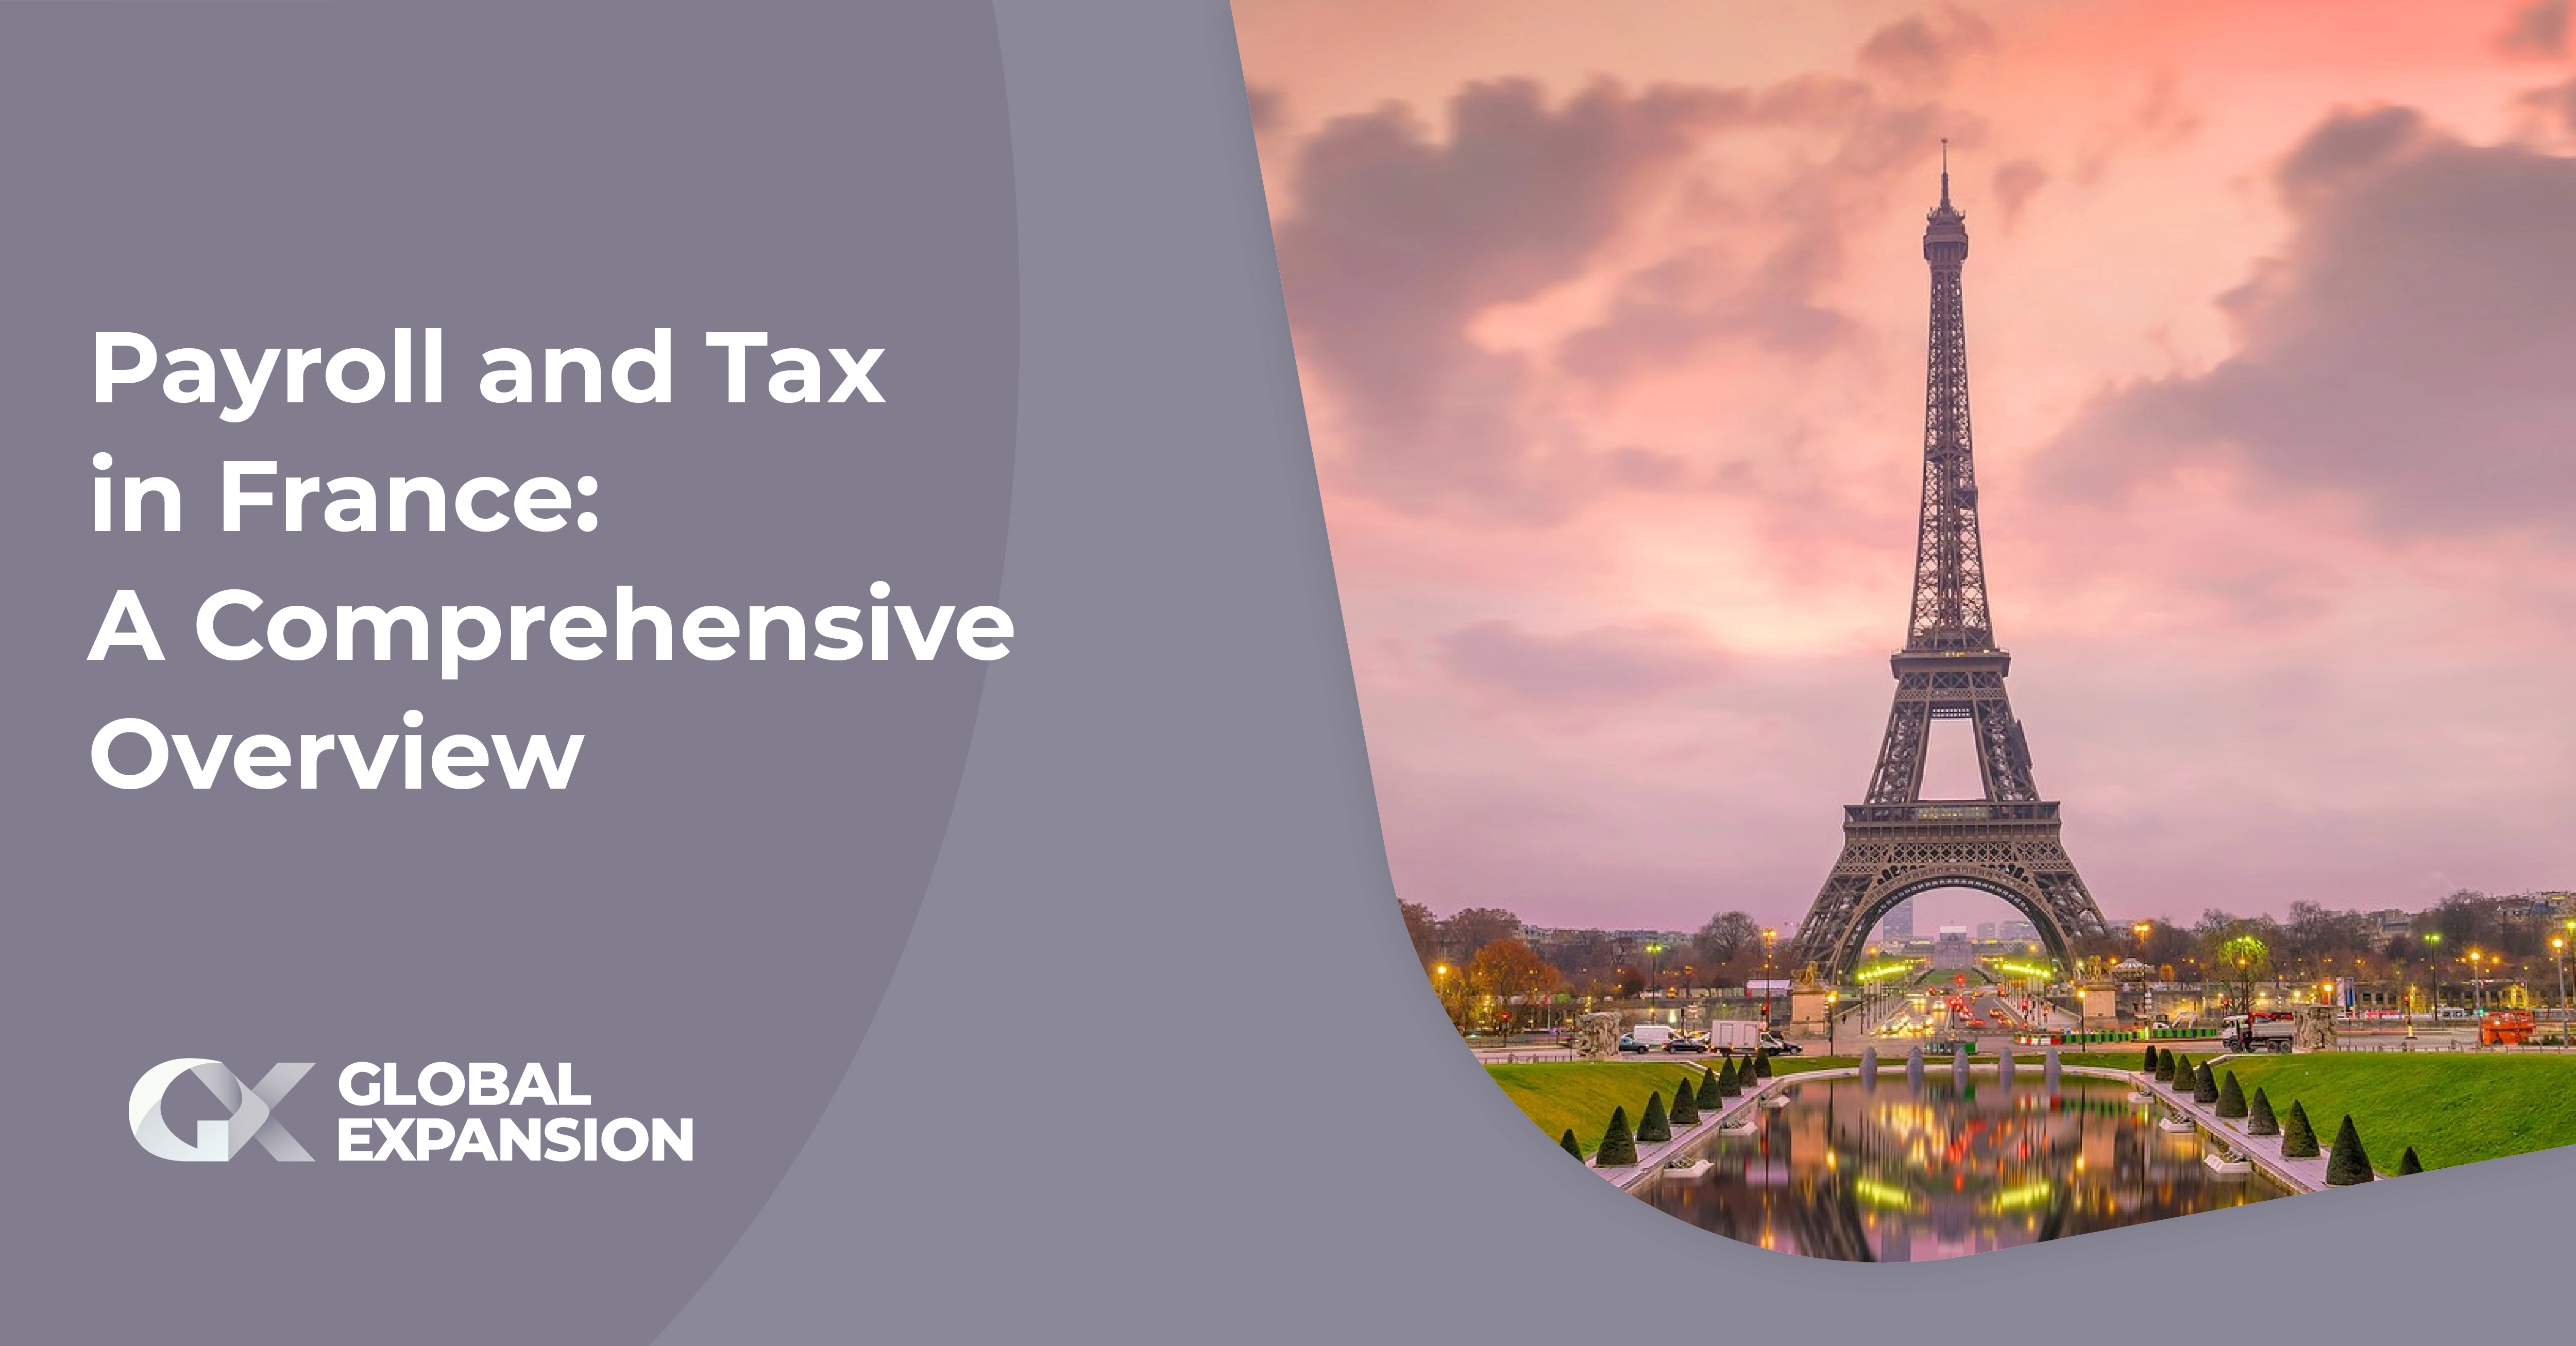 Payroll and Tax in France: A Comprehensive Overview